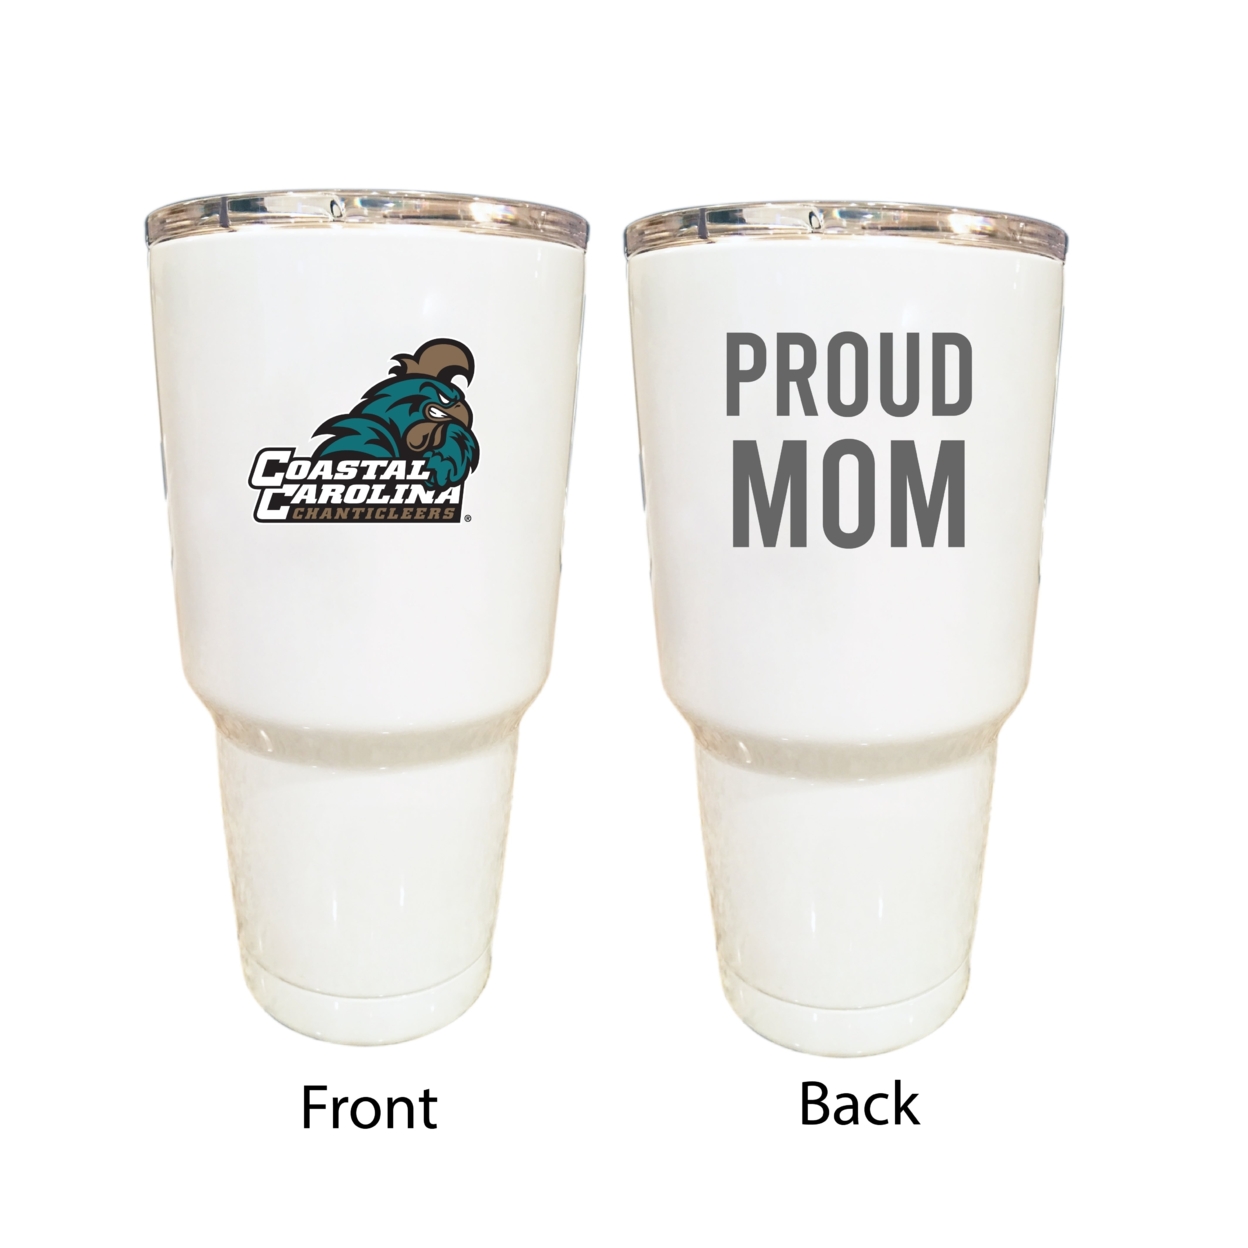 Coastal Carolina University Proud Mom 24 Oz Insulated Stainless Steel Tumblers Choose Your Color.